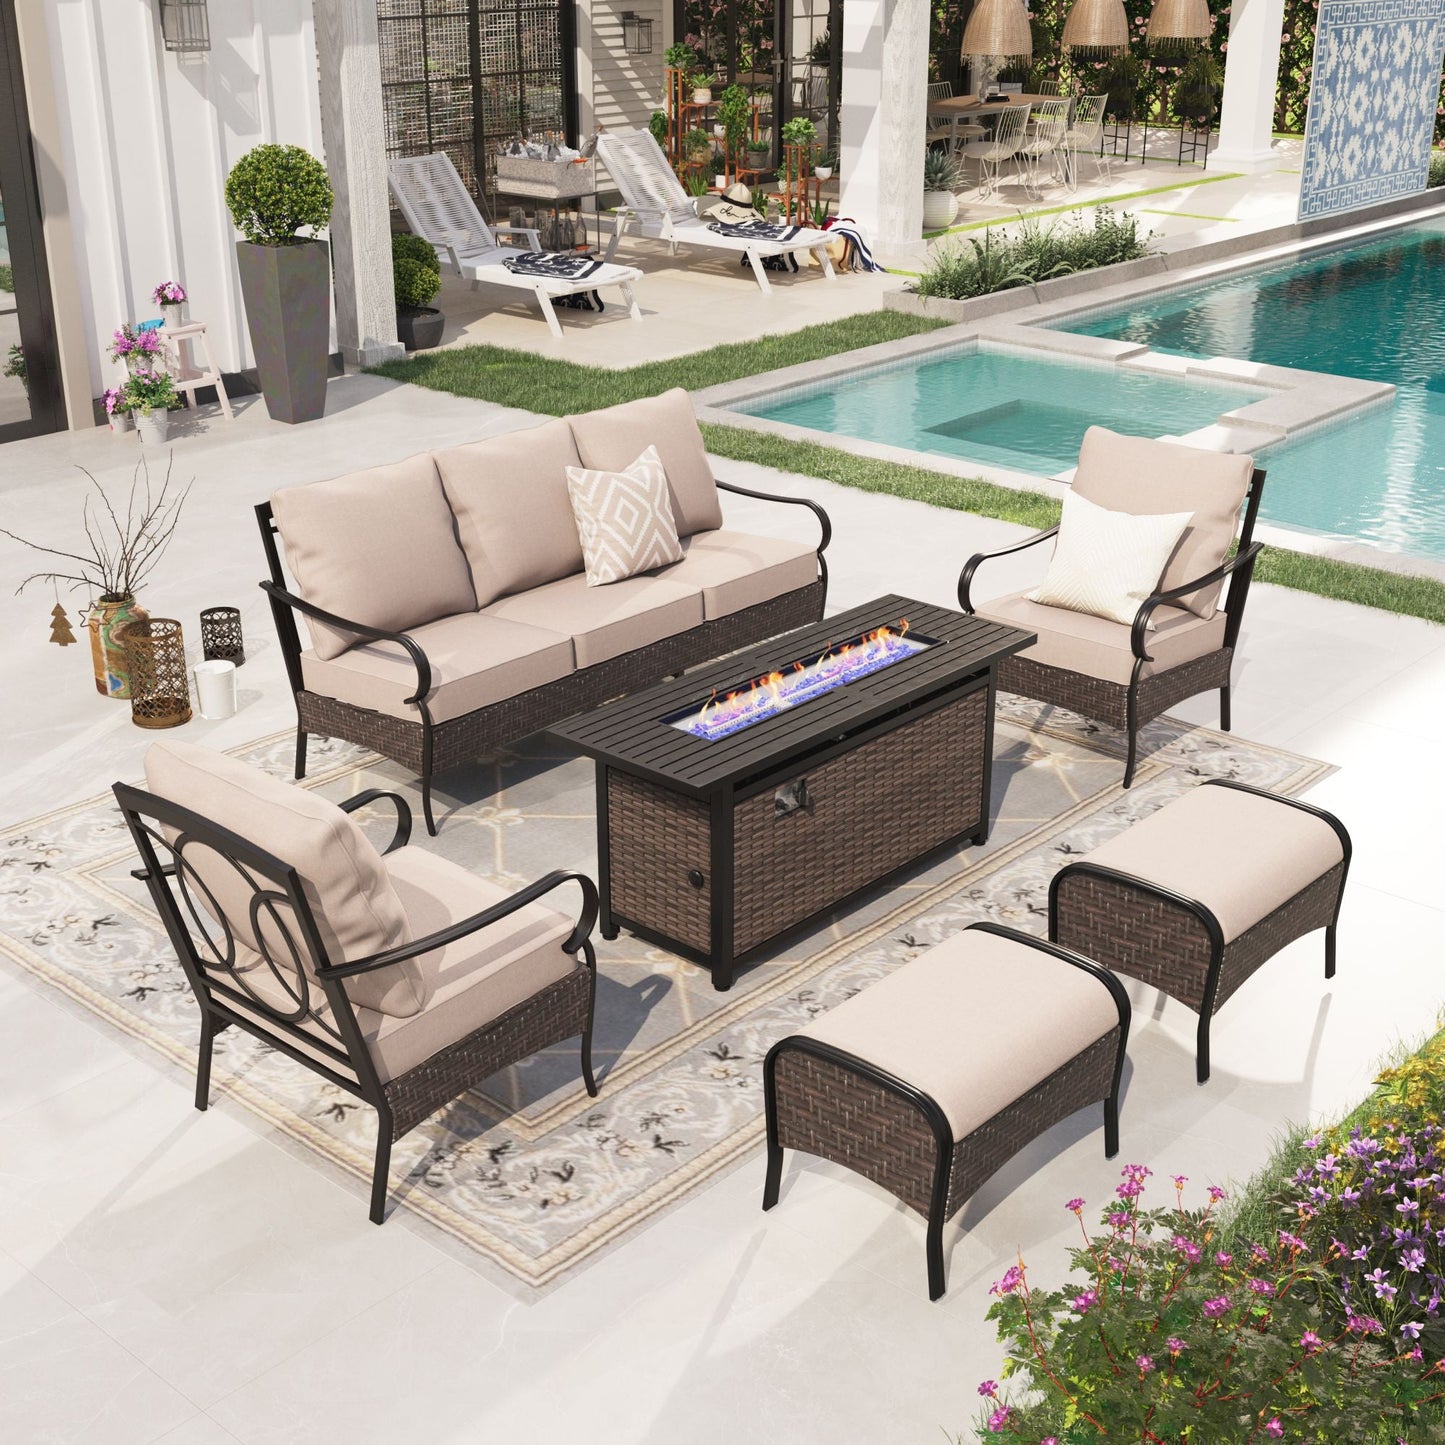 Alpha Joy 6 Piece Patio Furniture Set with Fire Pit Table 7-Seat Wicker Outdoor Conversation Set